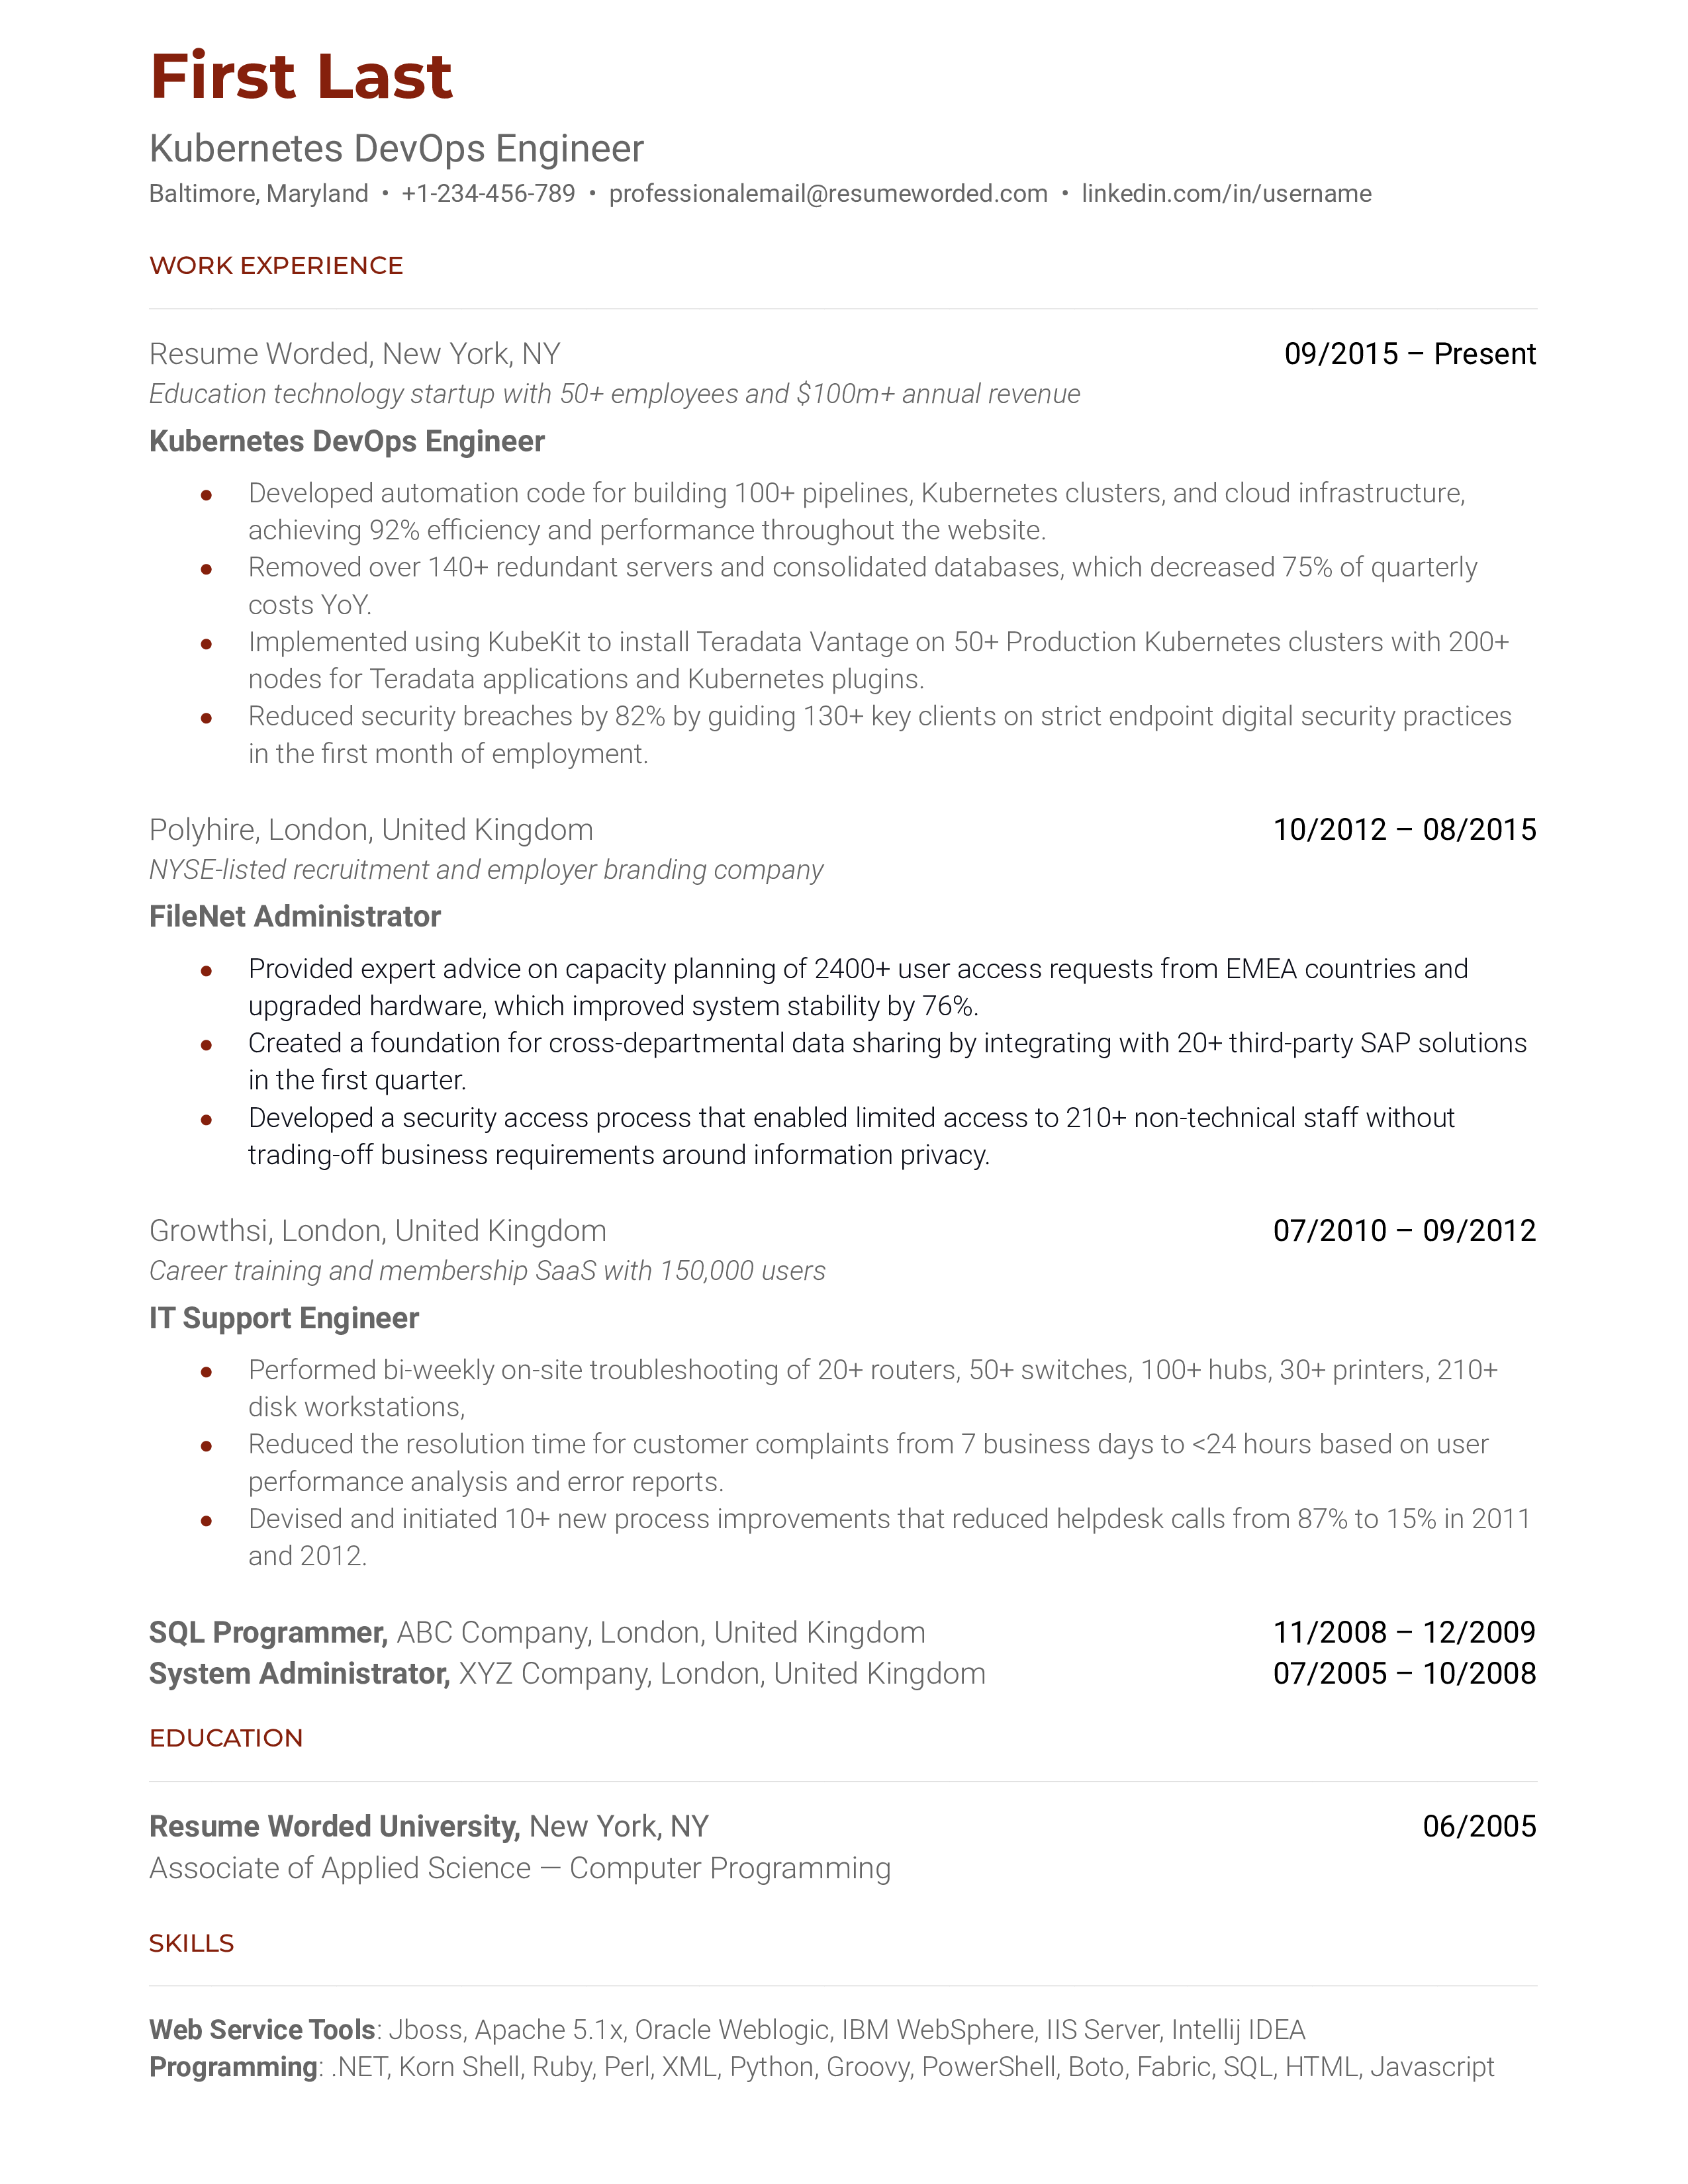 A Kubernetes DevOps engineer resume template including web service tools and programming skills.